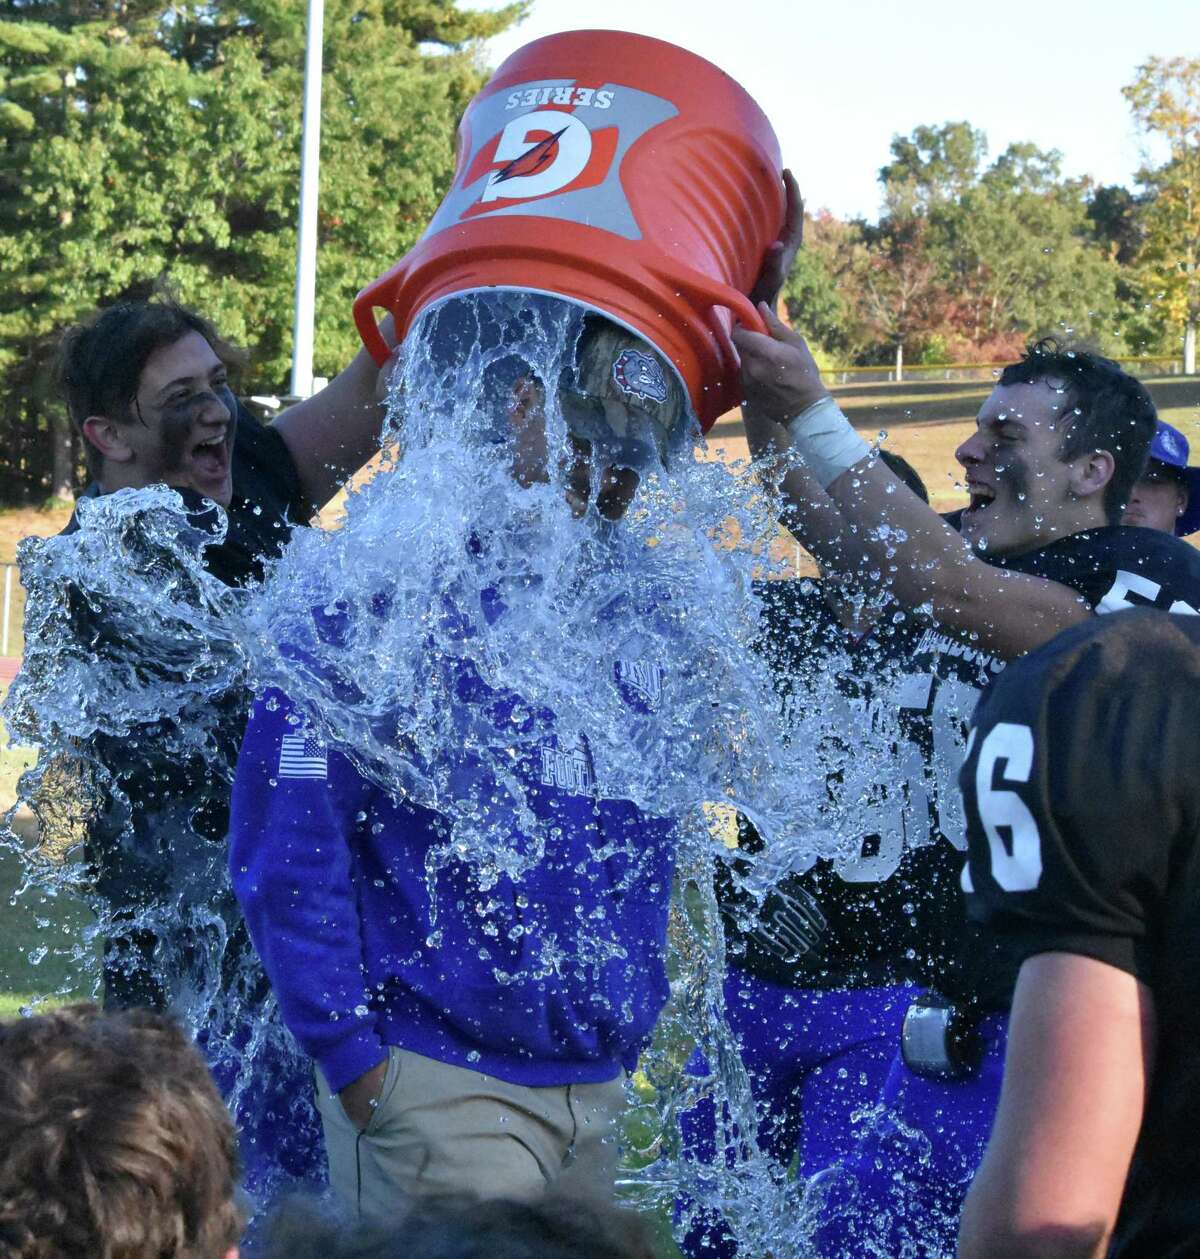 Stafford/East Windsor/Somers coach Brian Mazzone is given a Gatorade bath by his team after they beat Valley Regional/Old Lyme 21-7 at Stafford high school on Saturday, Oct. 5, 2019. (Pete Paguaga, Hearst Connecticut Media)